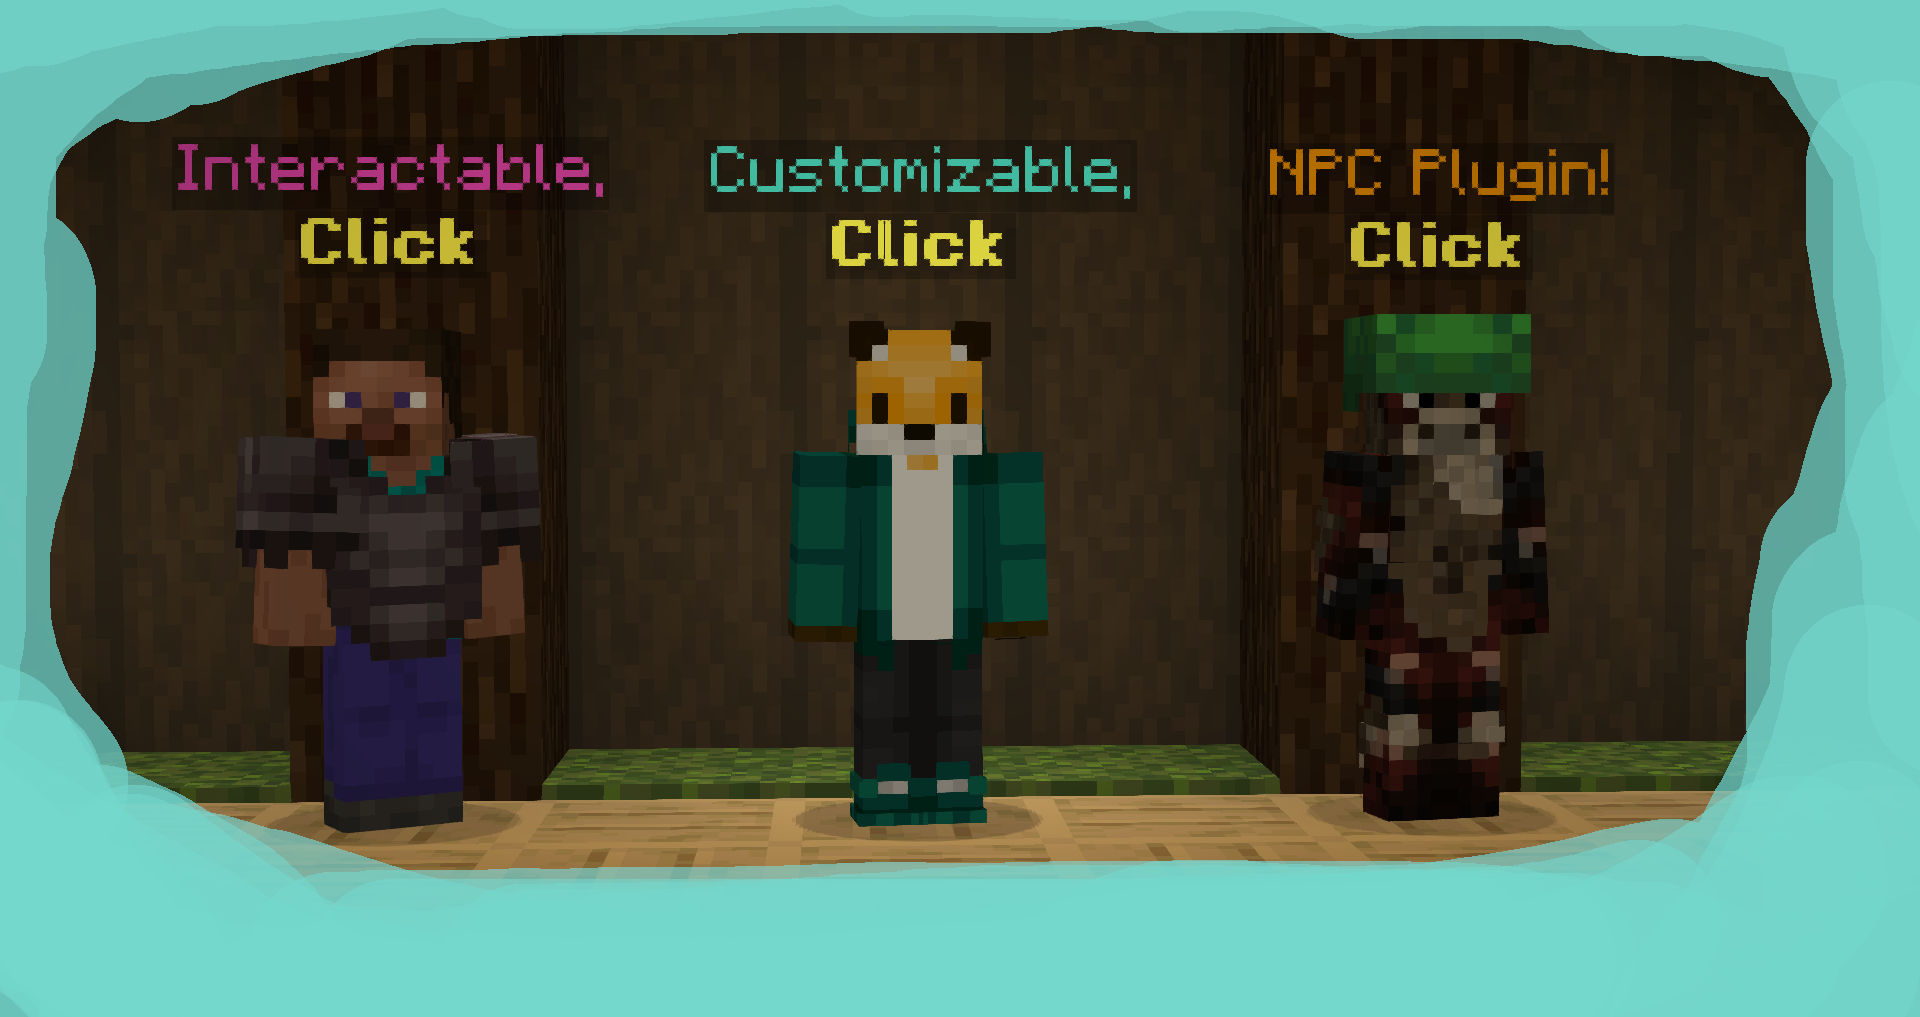 A simple banner for the plugin!